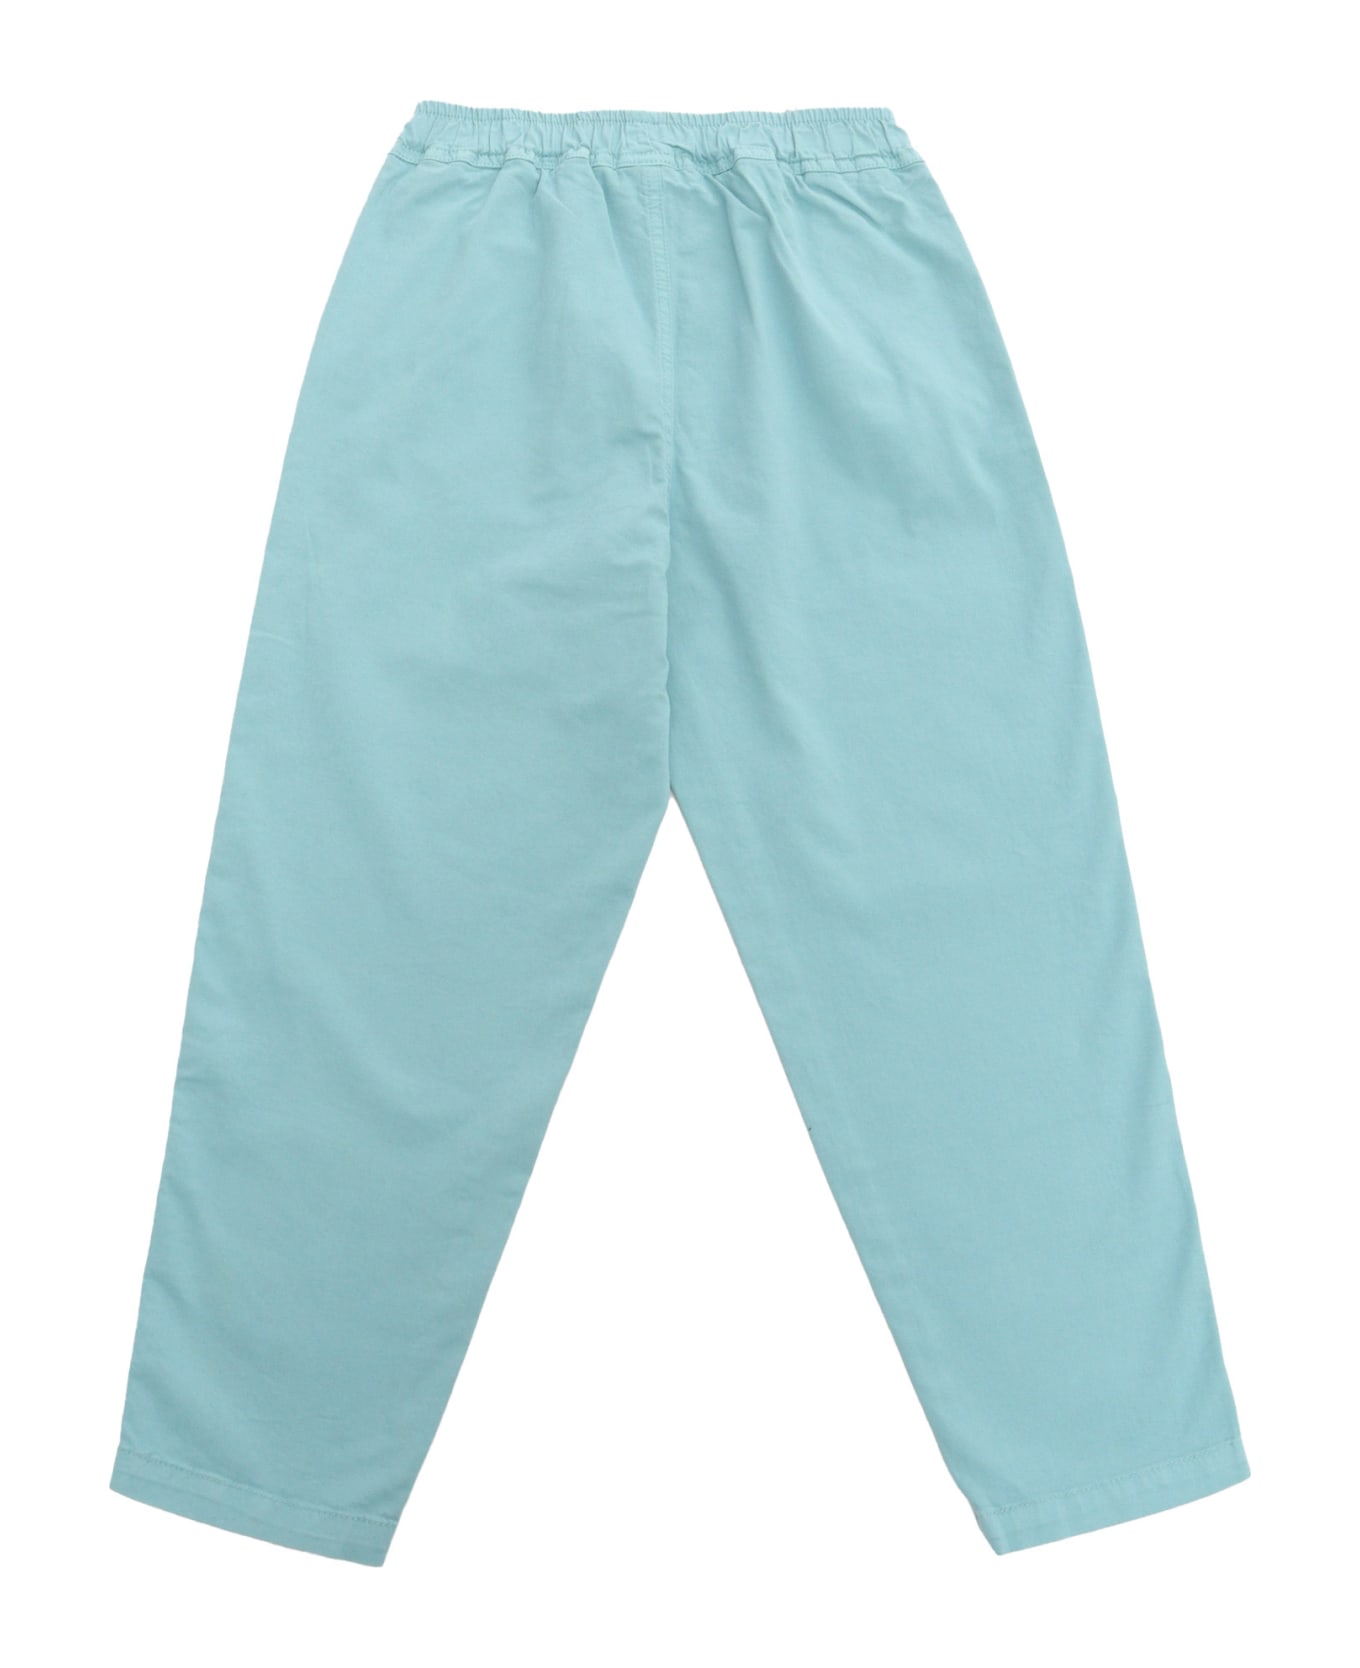 Il Gufo Light Blue Trousers - GREEN ボトムス